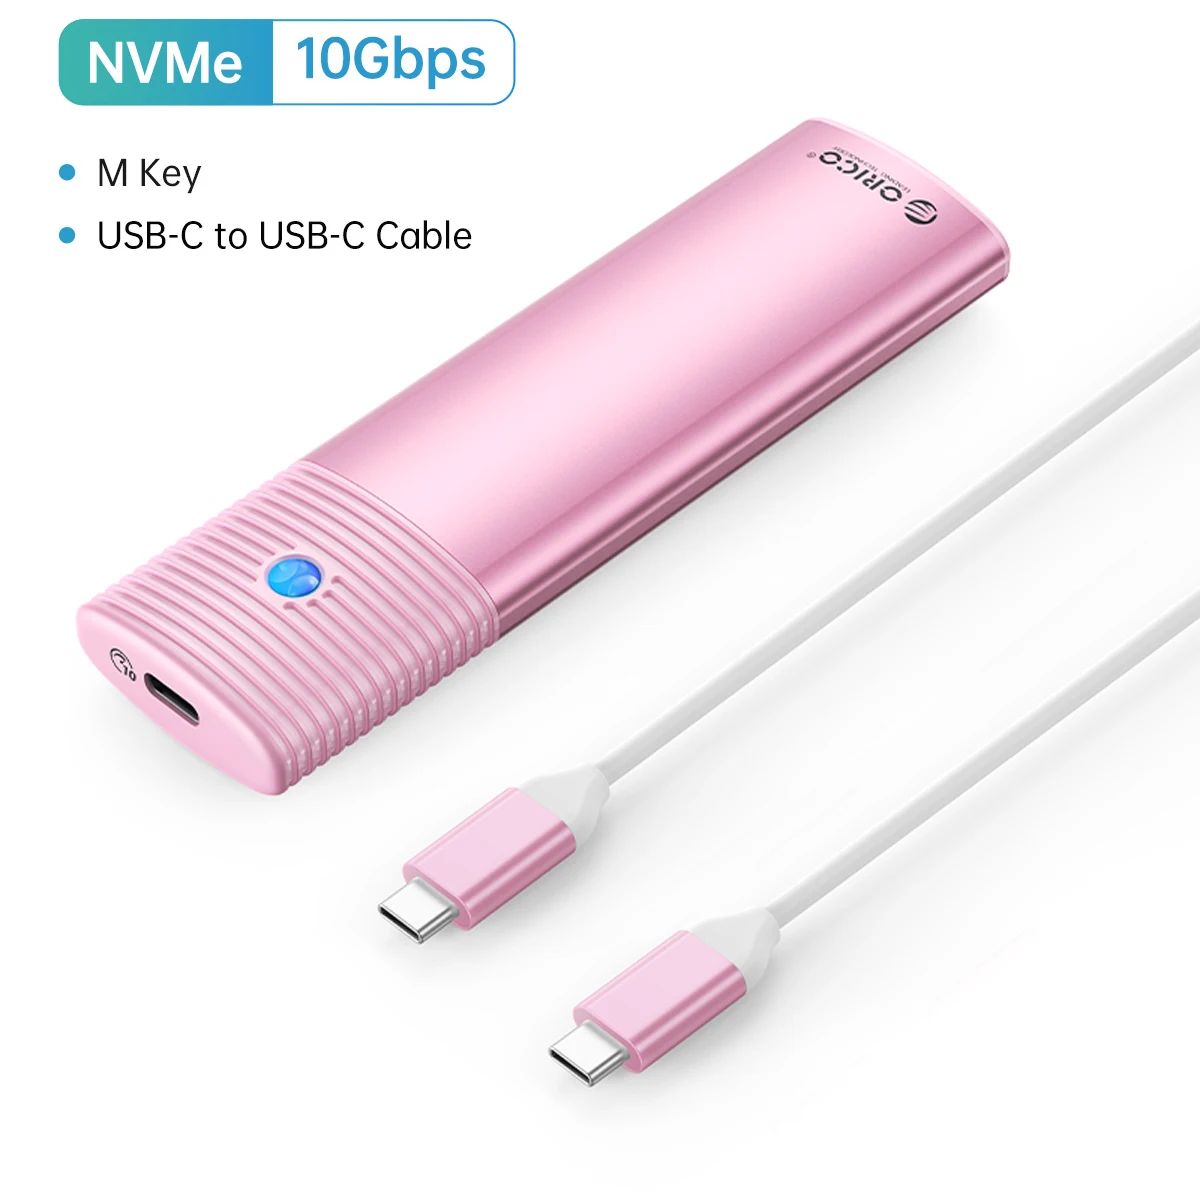 NVMe-10Gbps-Pink